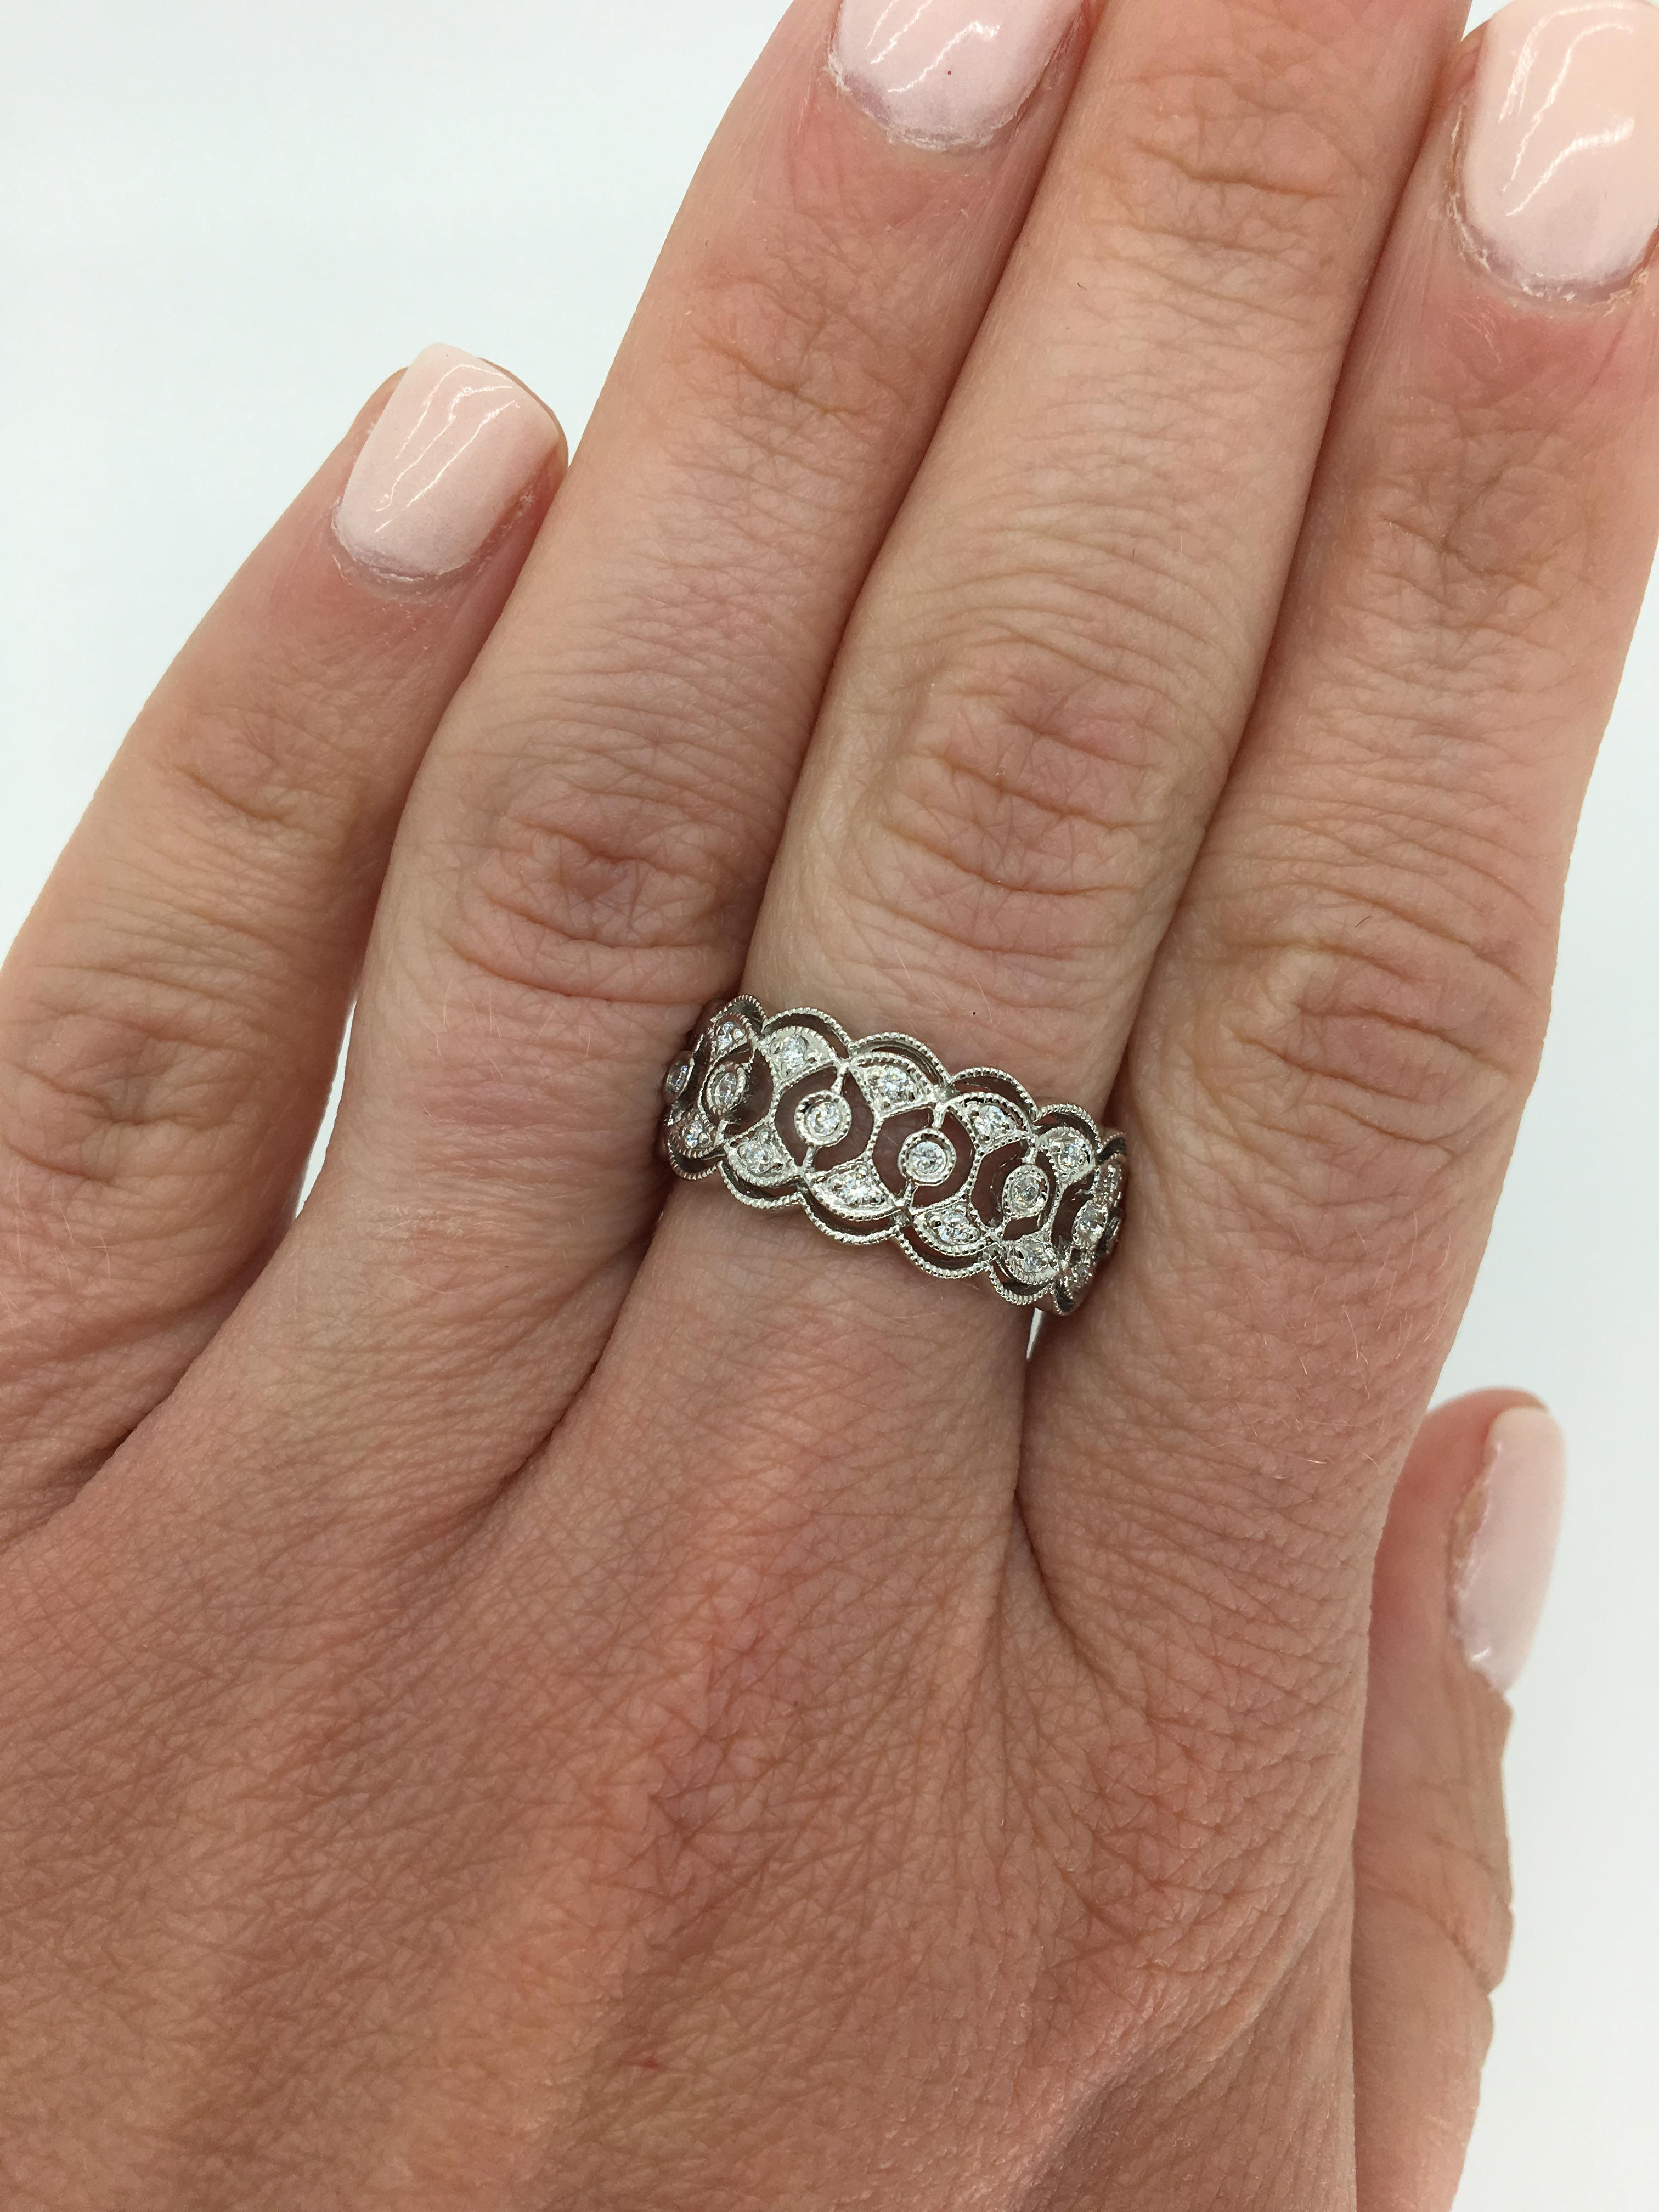 Filigree detailed diamond band style ring crafted in 14k white gold.

Diamond Carat Weight: Approximately .33CTW
Diamond Cut: Round Brilliant Cut
Color: Average  G-I
Clarity: Average I
Metal: 14K White Gold
Marked/Tested: Stamped “14K